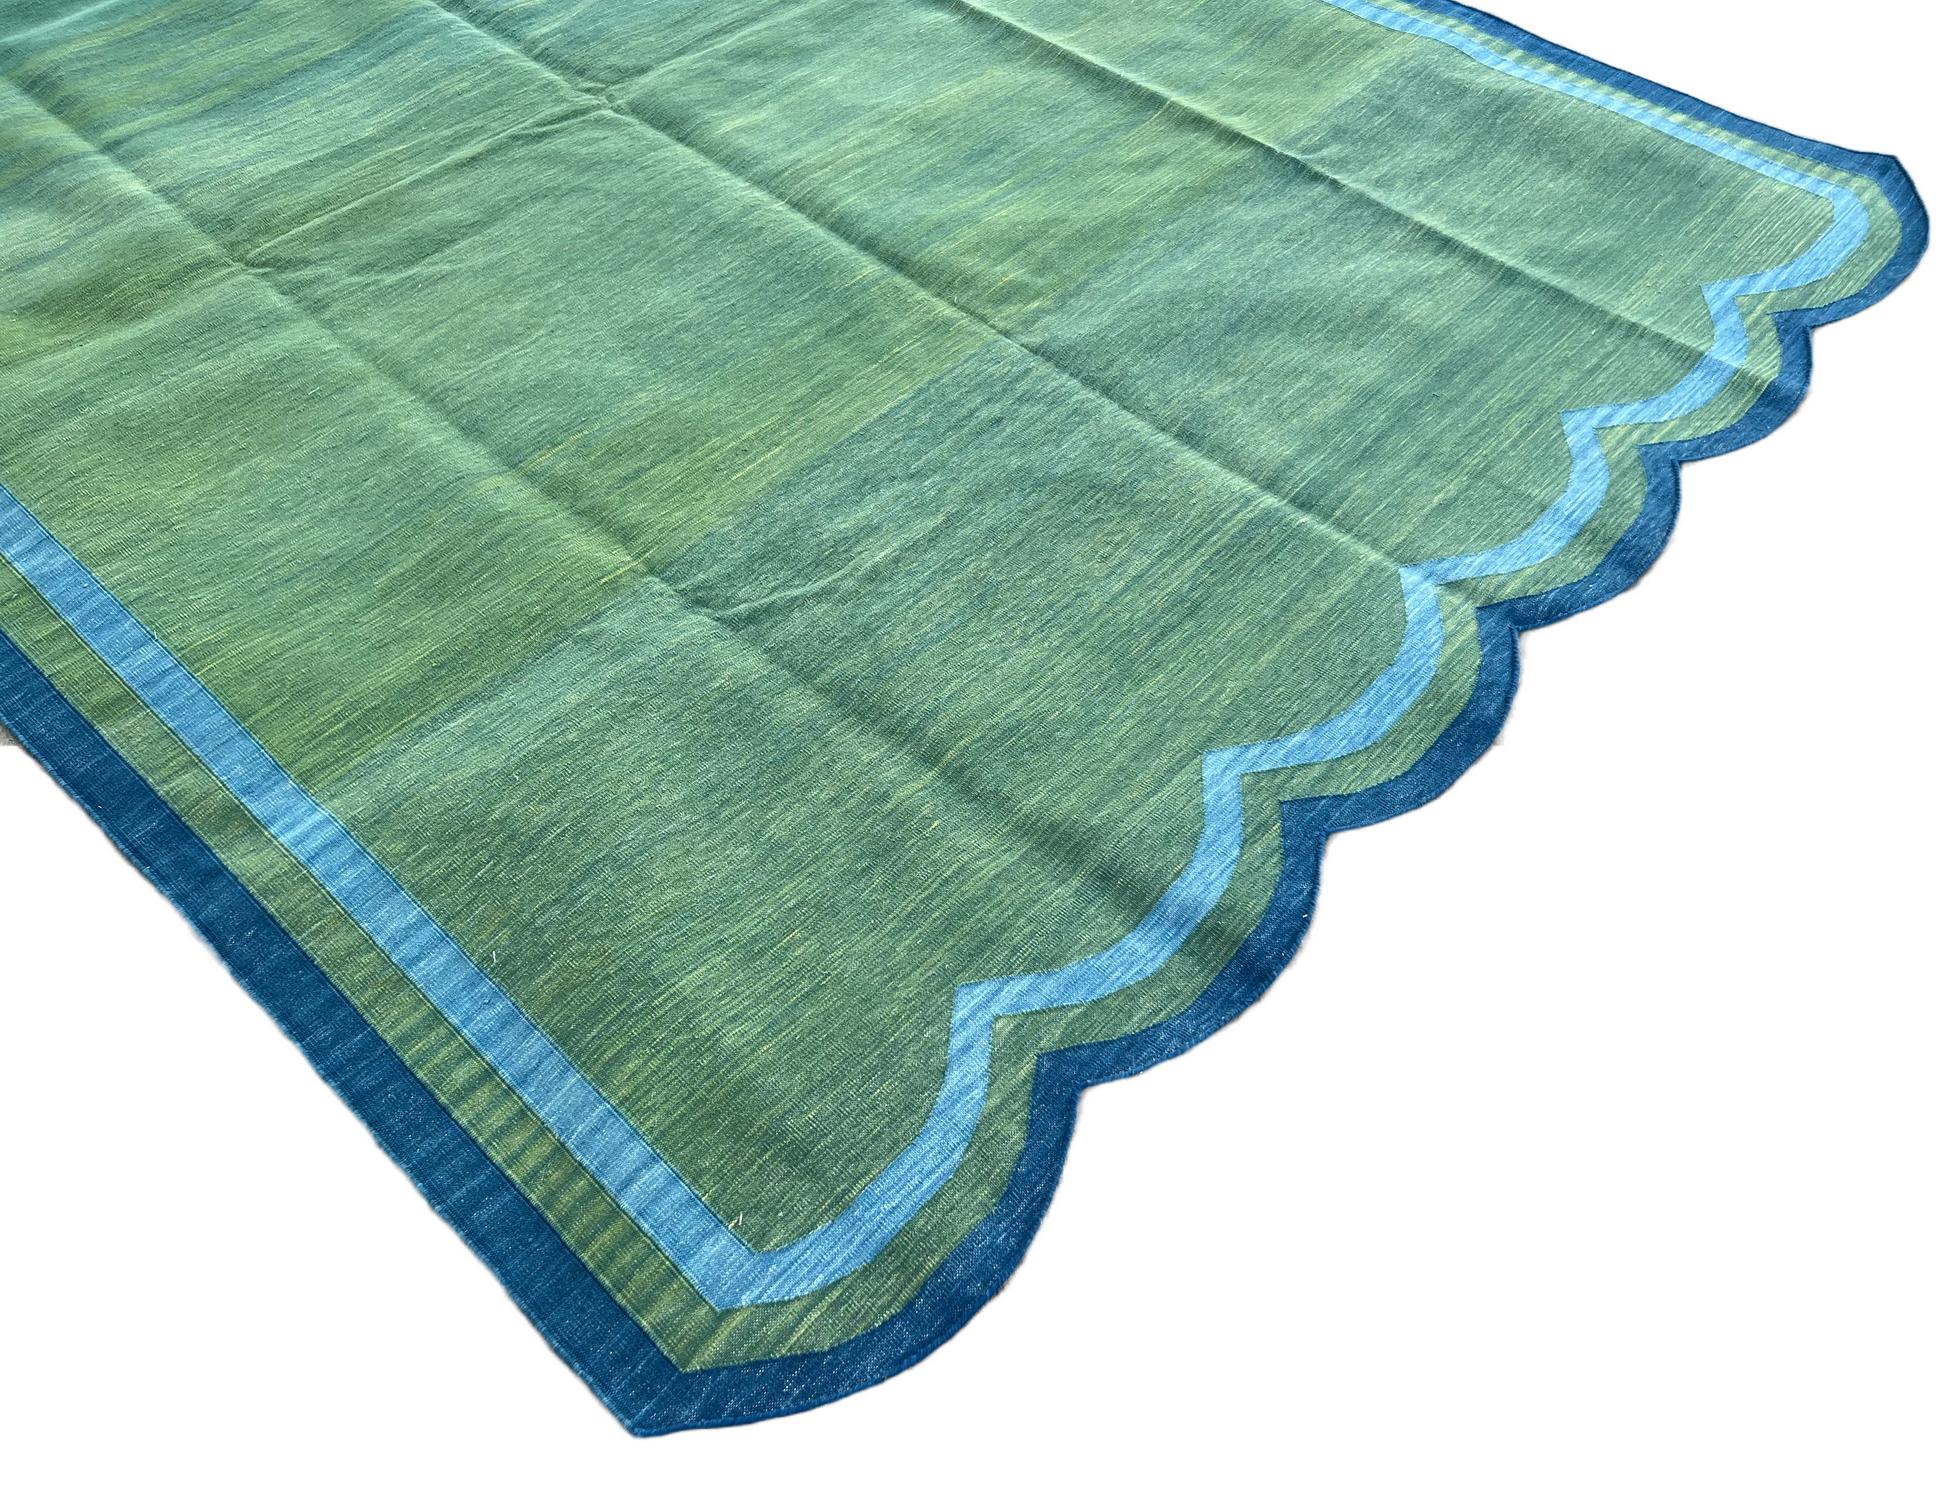 Hand-Woven Handmade Cotton Area Flat Weave Rug, 6x9 Green And Blue Scallop Striped Dhurrie For Sale